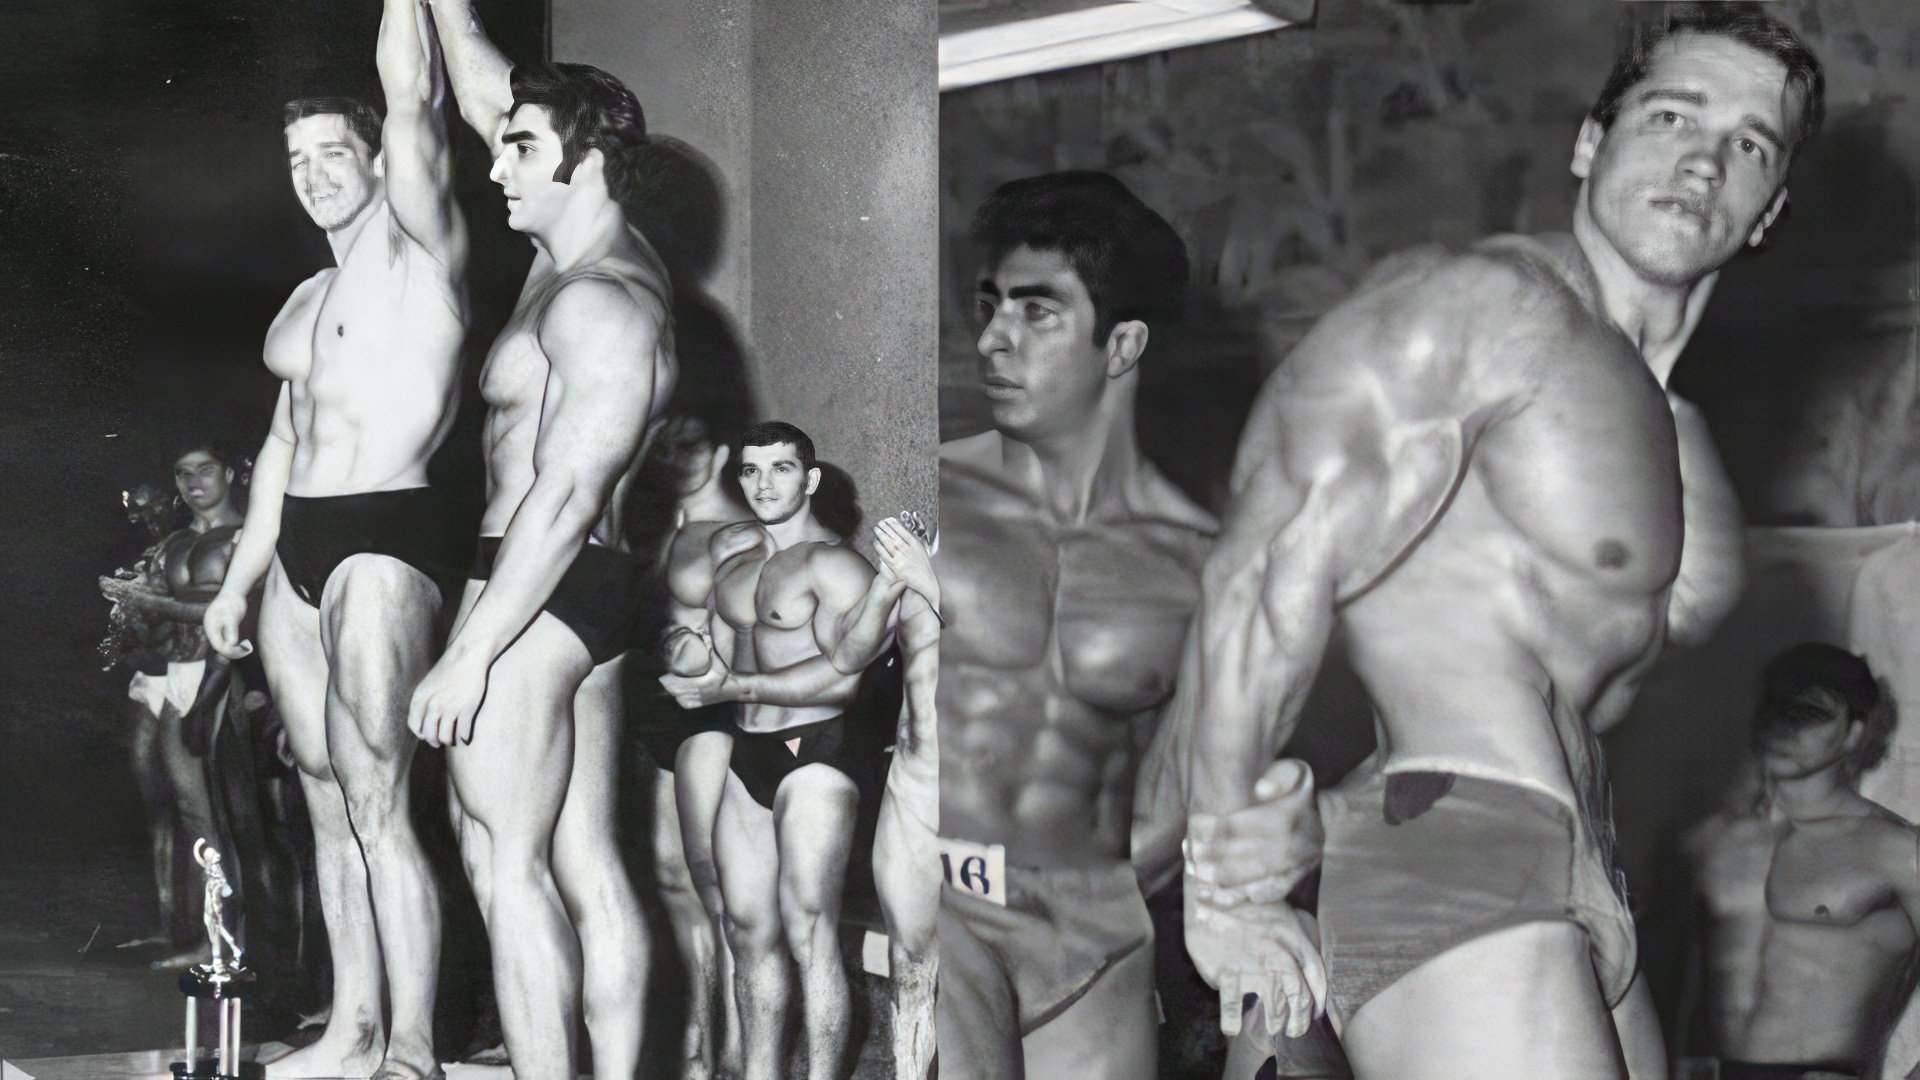 Arnold Schwarzenegger at 'Mr. Universe' in 1966 and 1967